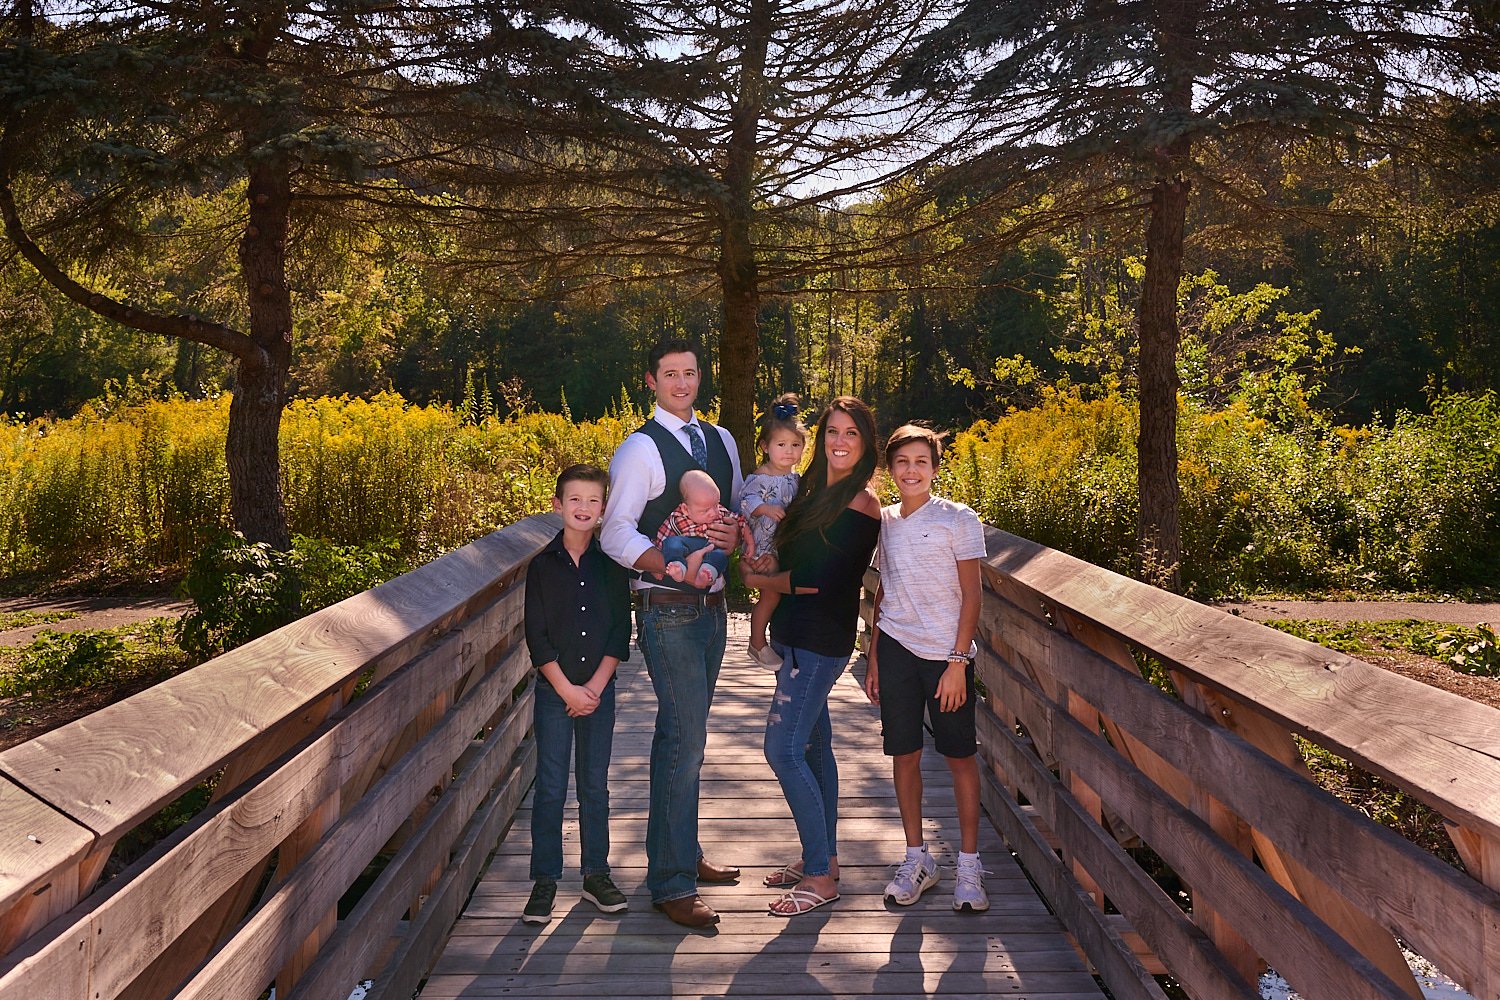  Kelly Larmann is posing for family portraits with her husband and four children aged from a newborn baby boy to a toddler girl and two middle-schooler sons. The daughter was exceptionally agile. 